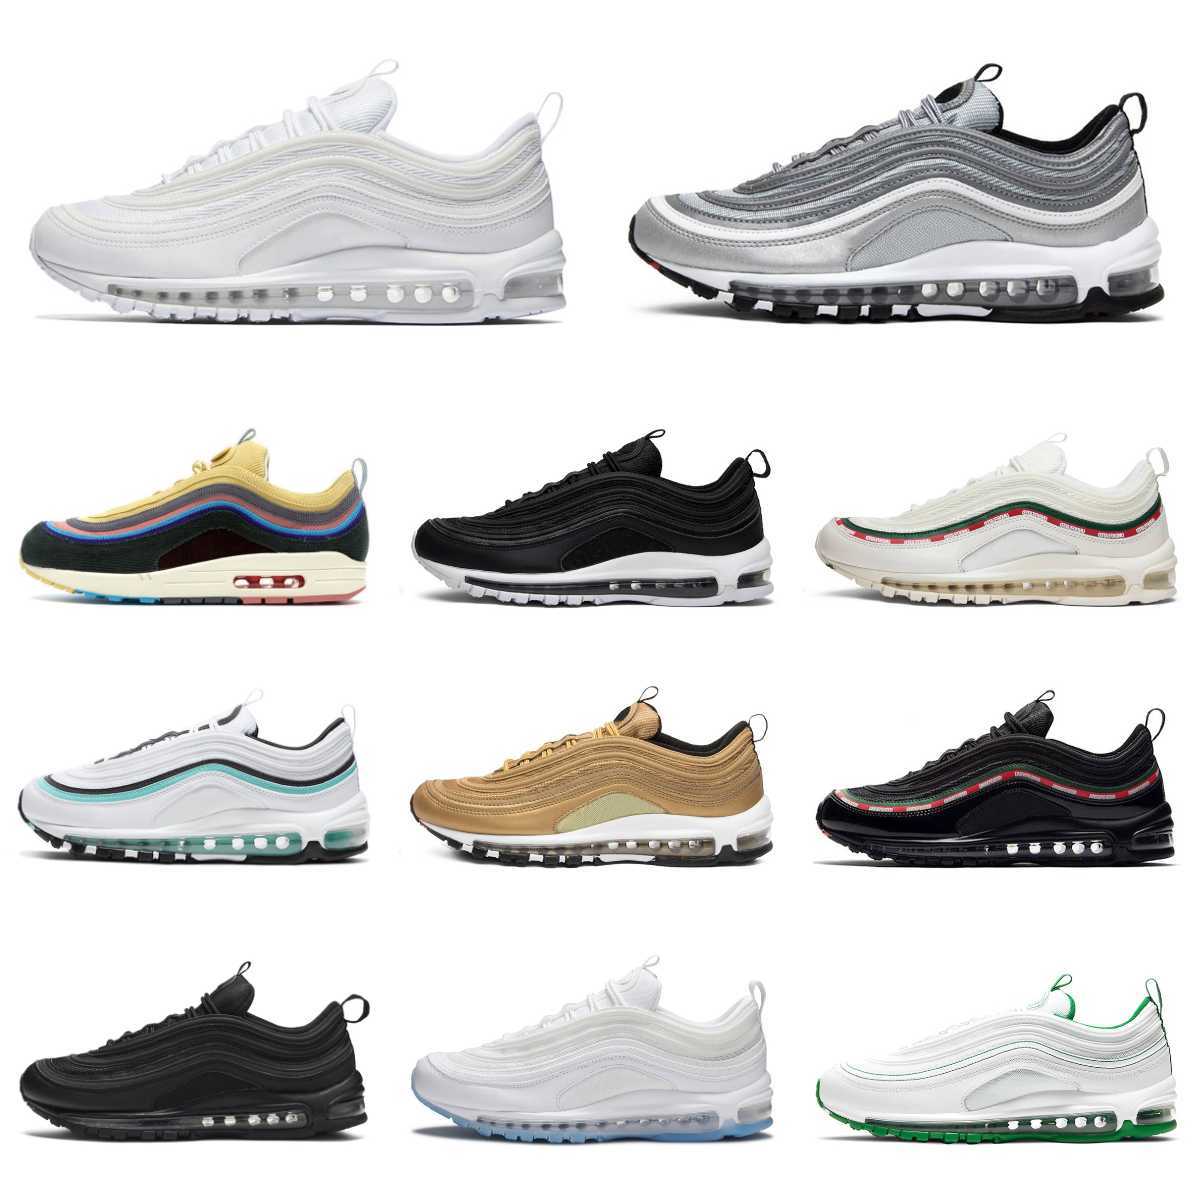 

Trainers Max 97 Mens Casual Shoes MSCHF X INRI Jesus Undefeated Black Summit Triple White Metalic Gold Women Designer Air 97s Sean Wotherspoon Sliver Bullet Sneakers, Please contact us